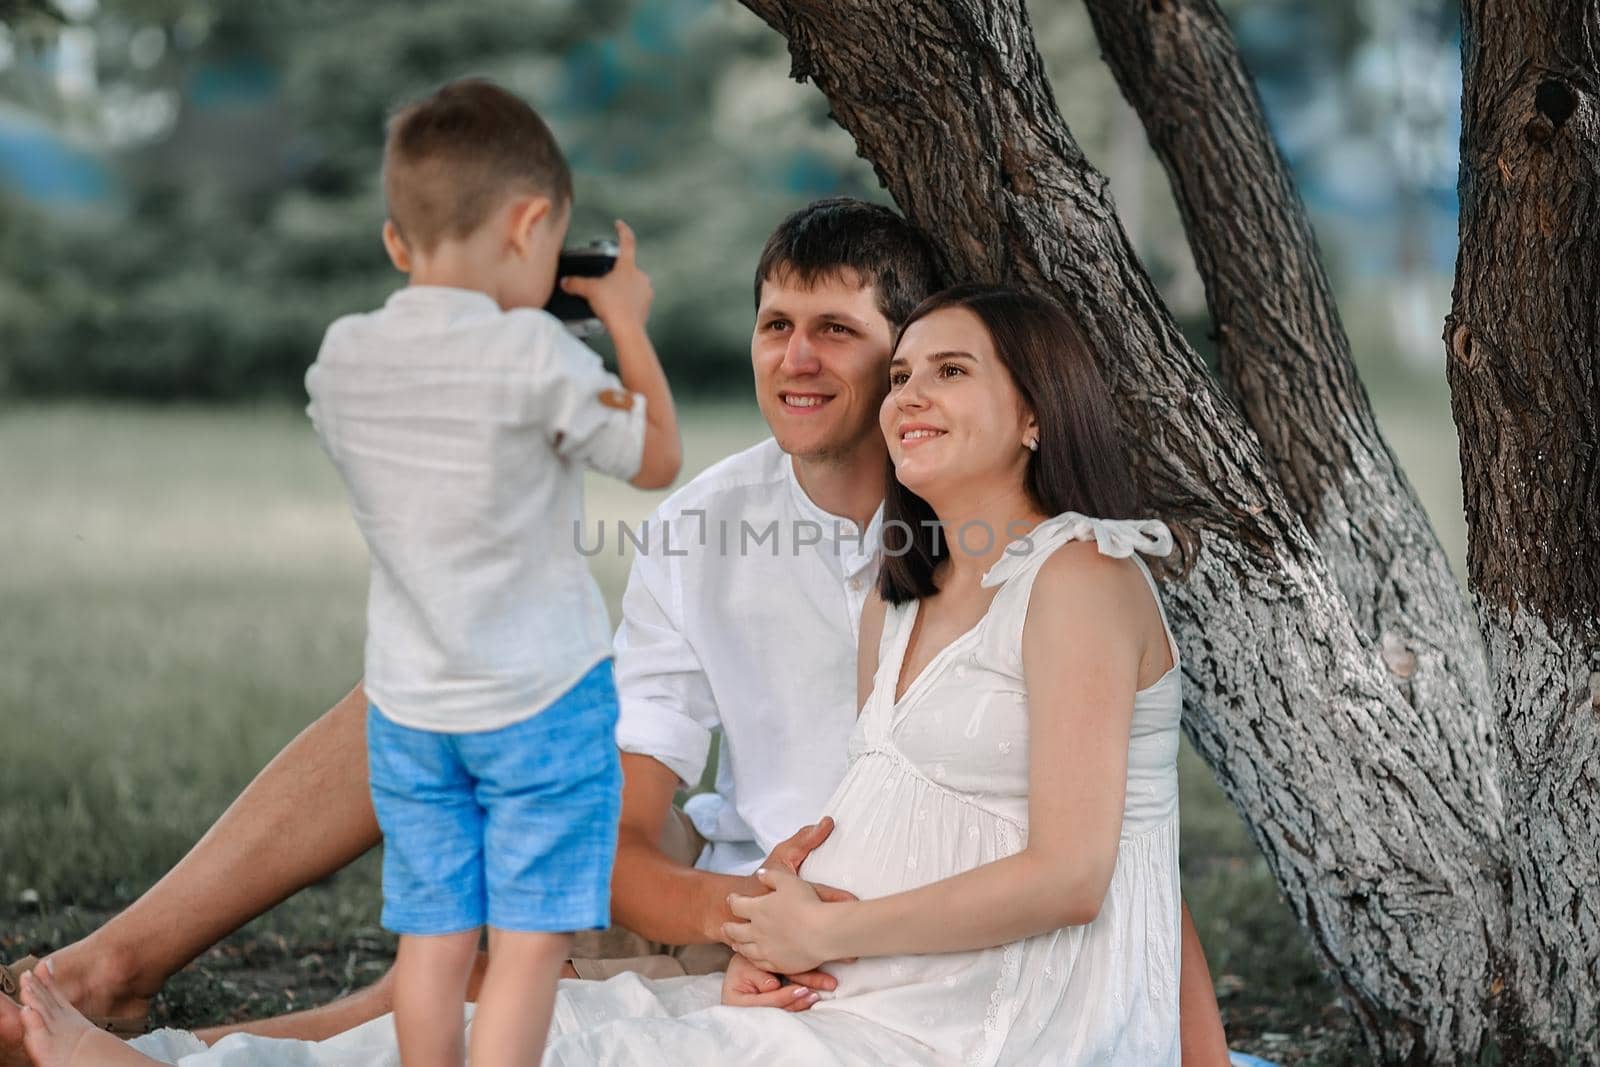 A happy family is resting under a tree on a summer day. The boy takes pictures of his mother and father, who are cheerful and smiling.